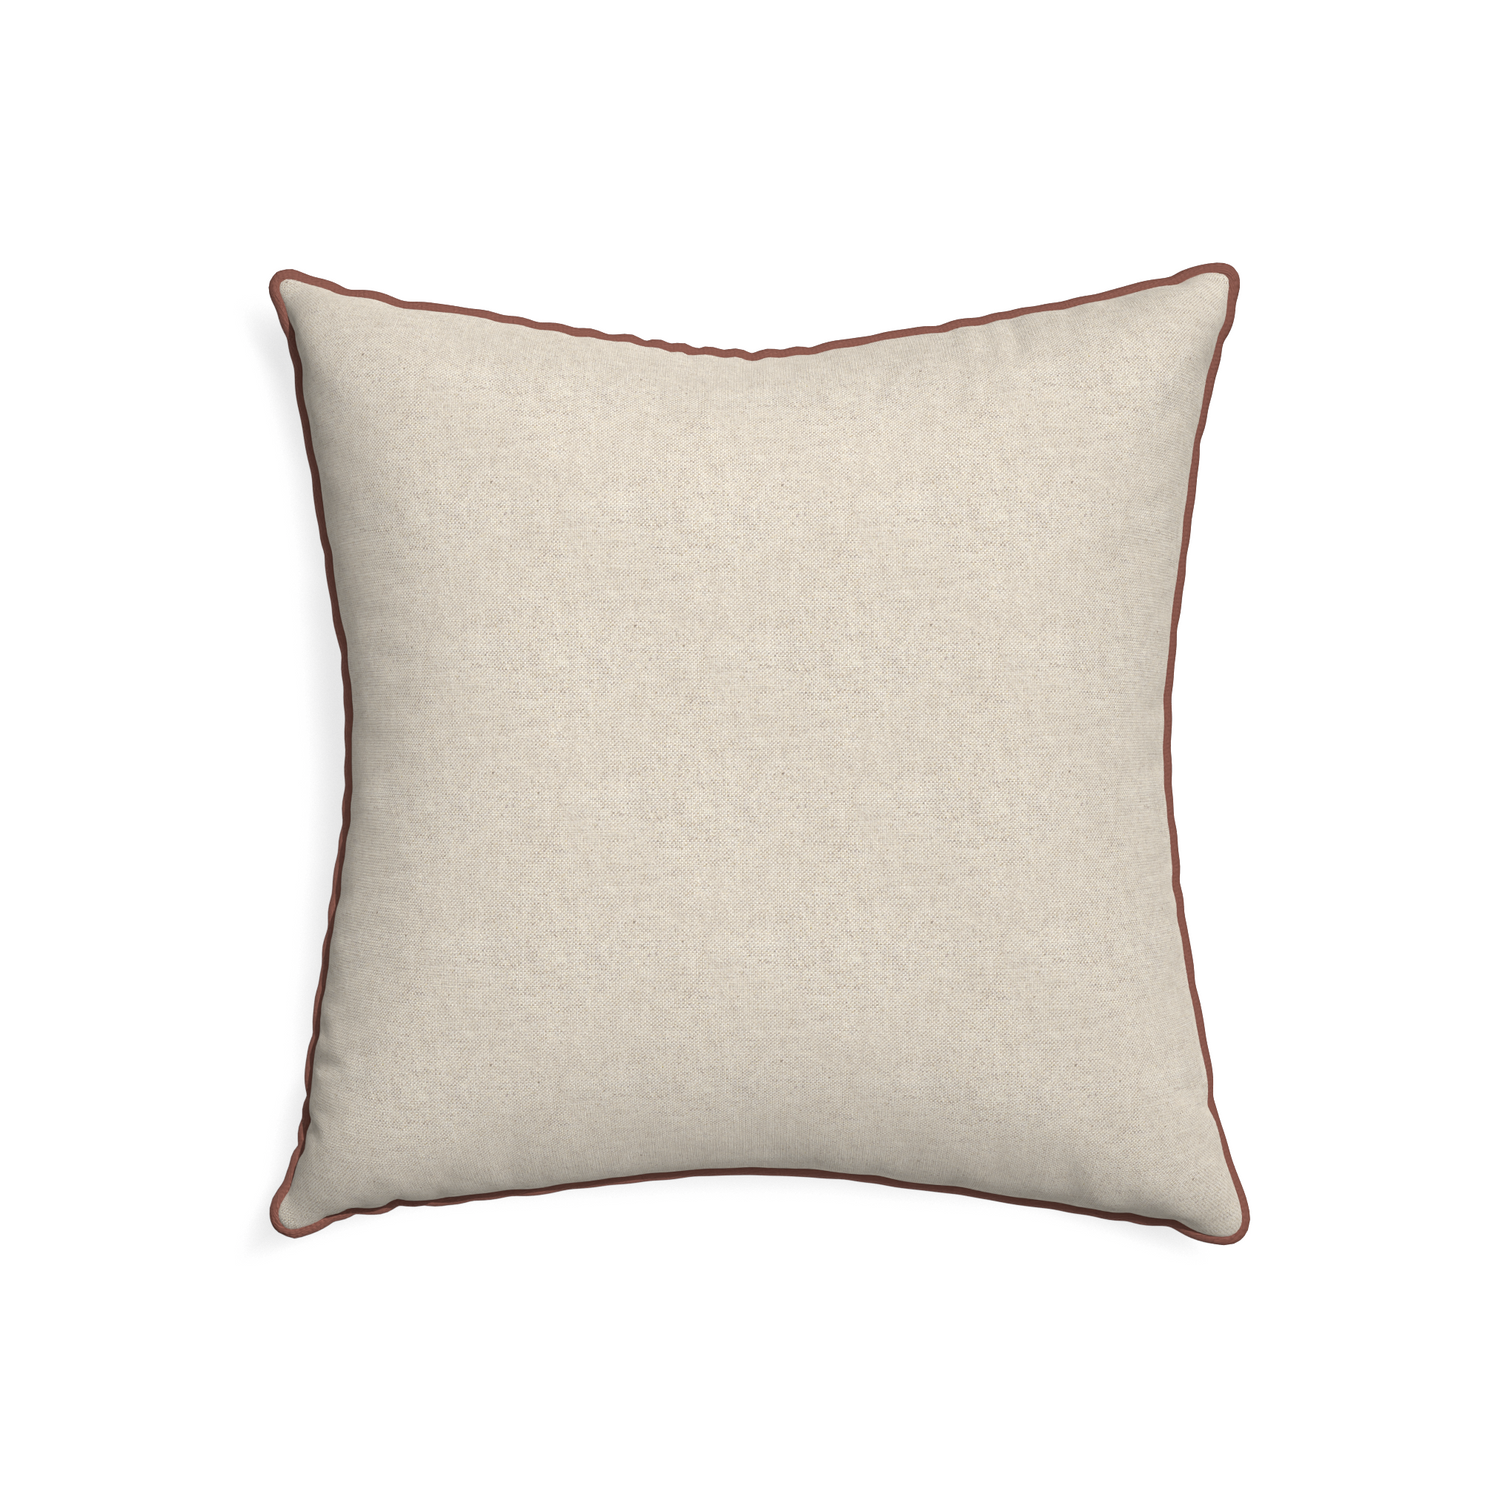 22-square oat custom light brownpillow with w piping on white background